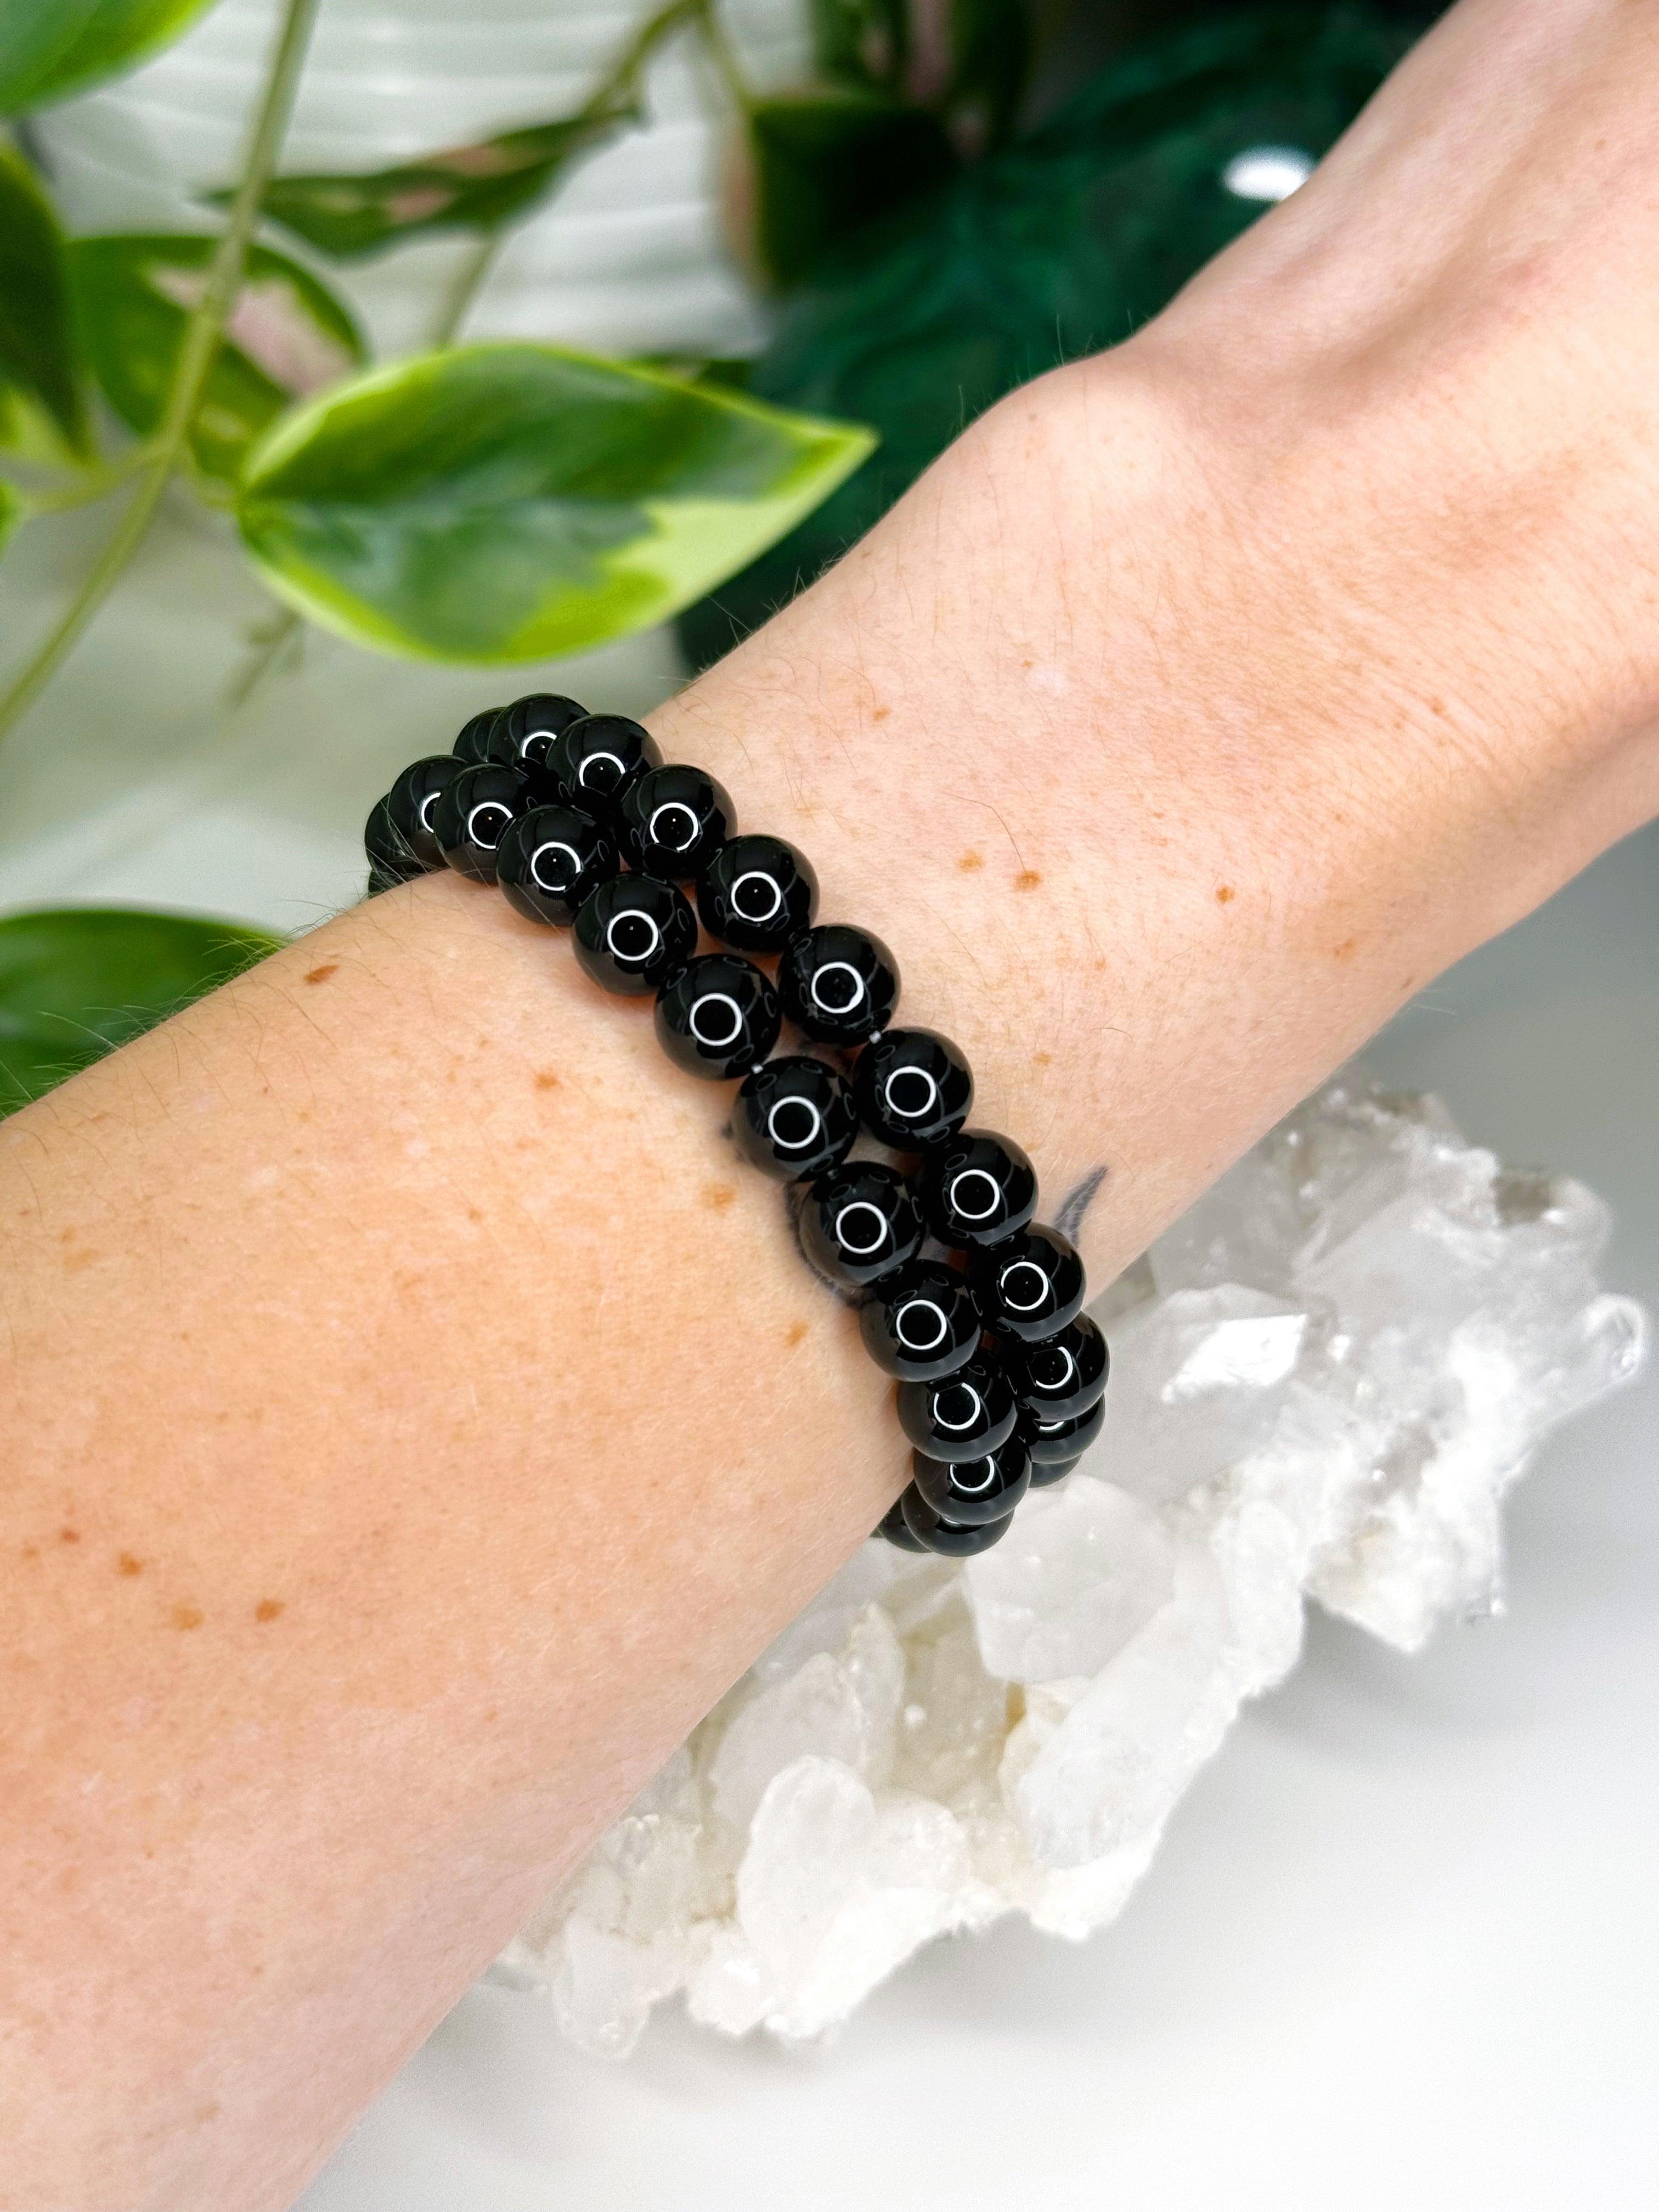 BLACK ONYX 8mm - HANDMADE CRYSTAL BRACELET - 8mm, black, black onyx, bracelet, crystal bracelet, handmade bracelet, jewelry, market bracelet, protection gift bundle, recently added, solstice collection, Wearable, winter solstice collection - The Mineral Maven